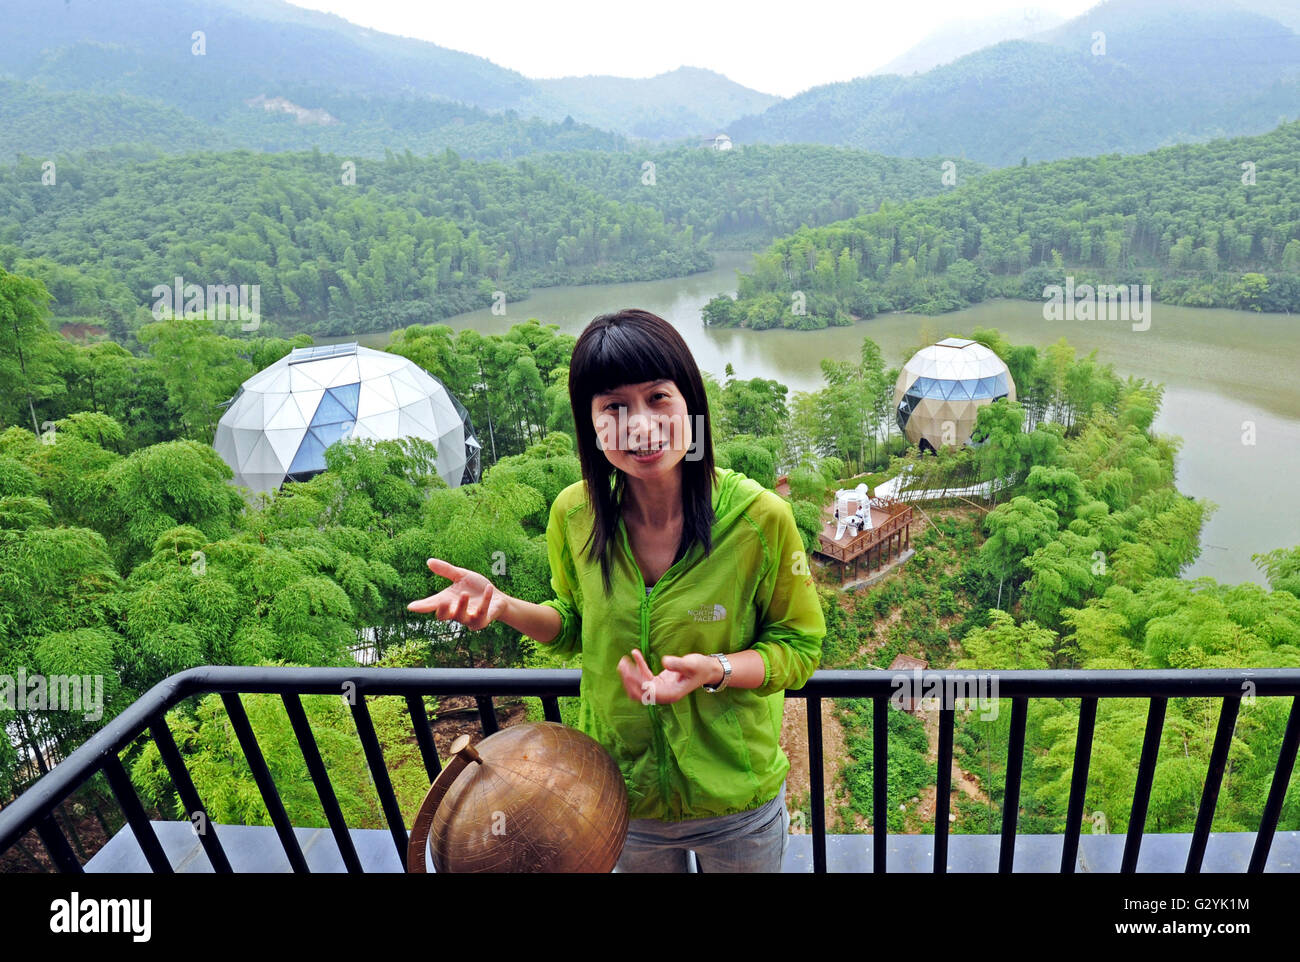 (160605) -- ANJI, June 5, 2016 (Xinhua) -- CEO Bao Huiqin introduces her environment-friendly resort in Anji County, east China's Zhejiang Province, June 2, 2016. Anji is known for its pleasant environment with flourishing bamboo plantations and many scenes from the famous movie 'Crouching Tiger, Hidden Dragon' were shot here. The county persists in green, low-carbon development, and strives to protect environment as well as to develop local economy. June 5 is observed as World Environment Day every year, and this year's theme issued by China's Ministry of Environment Protection is 'improving Stock Photo